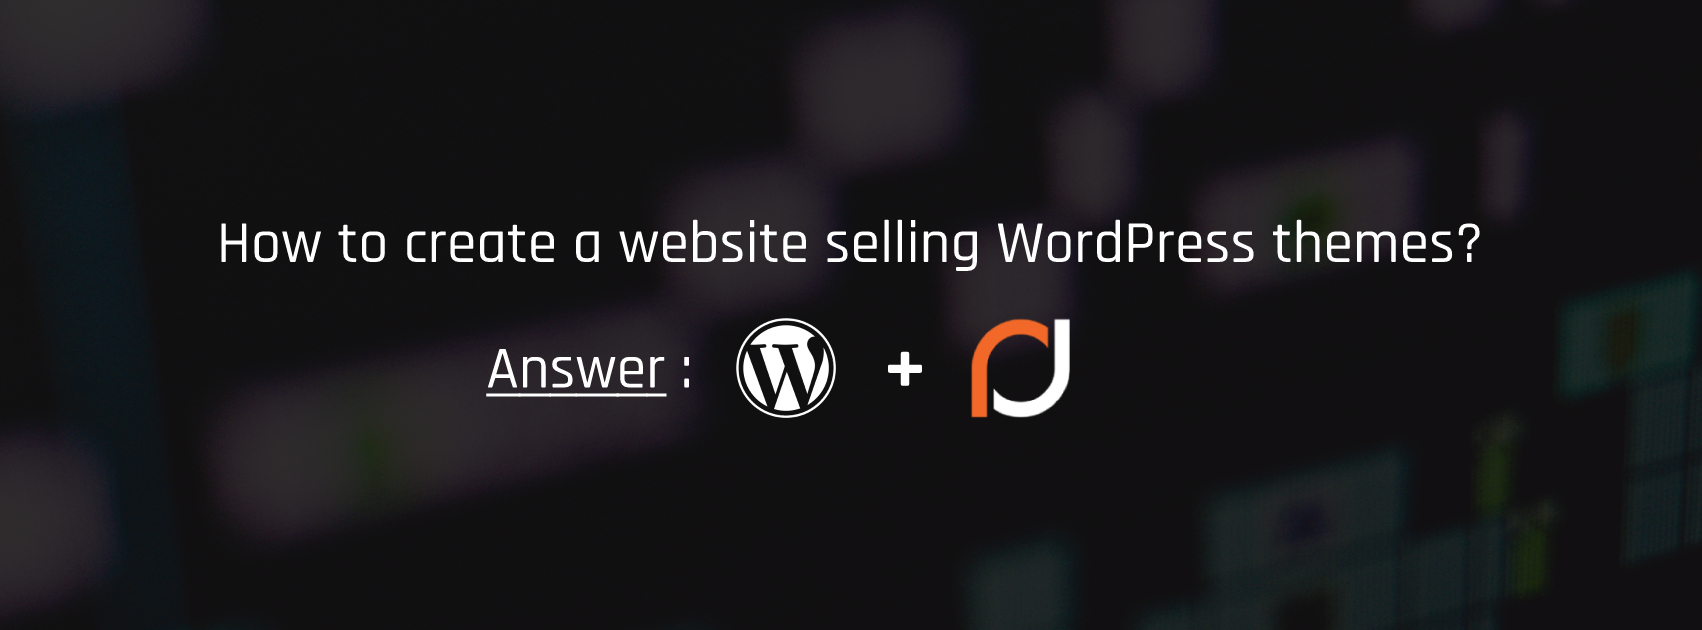 How to create a website selling WordPress themes